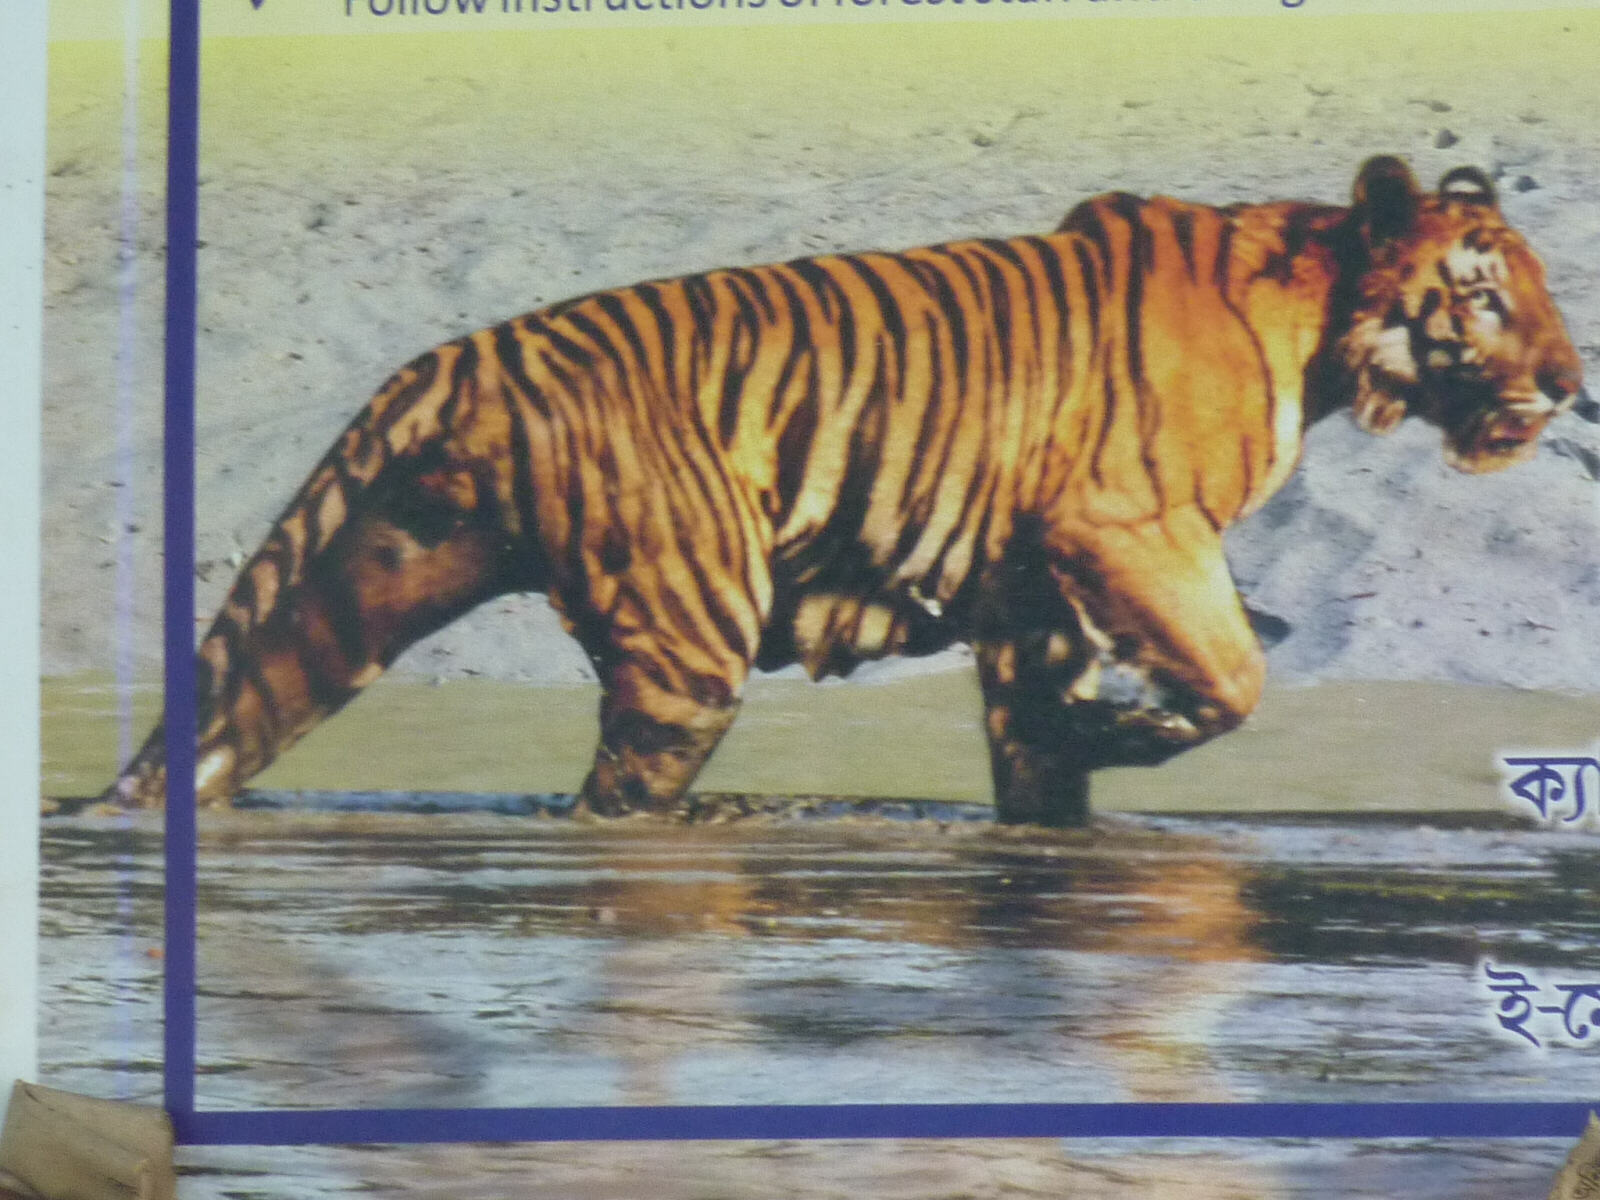 Tiger on a poster in the Sundarbans, West Bengal